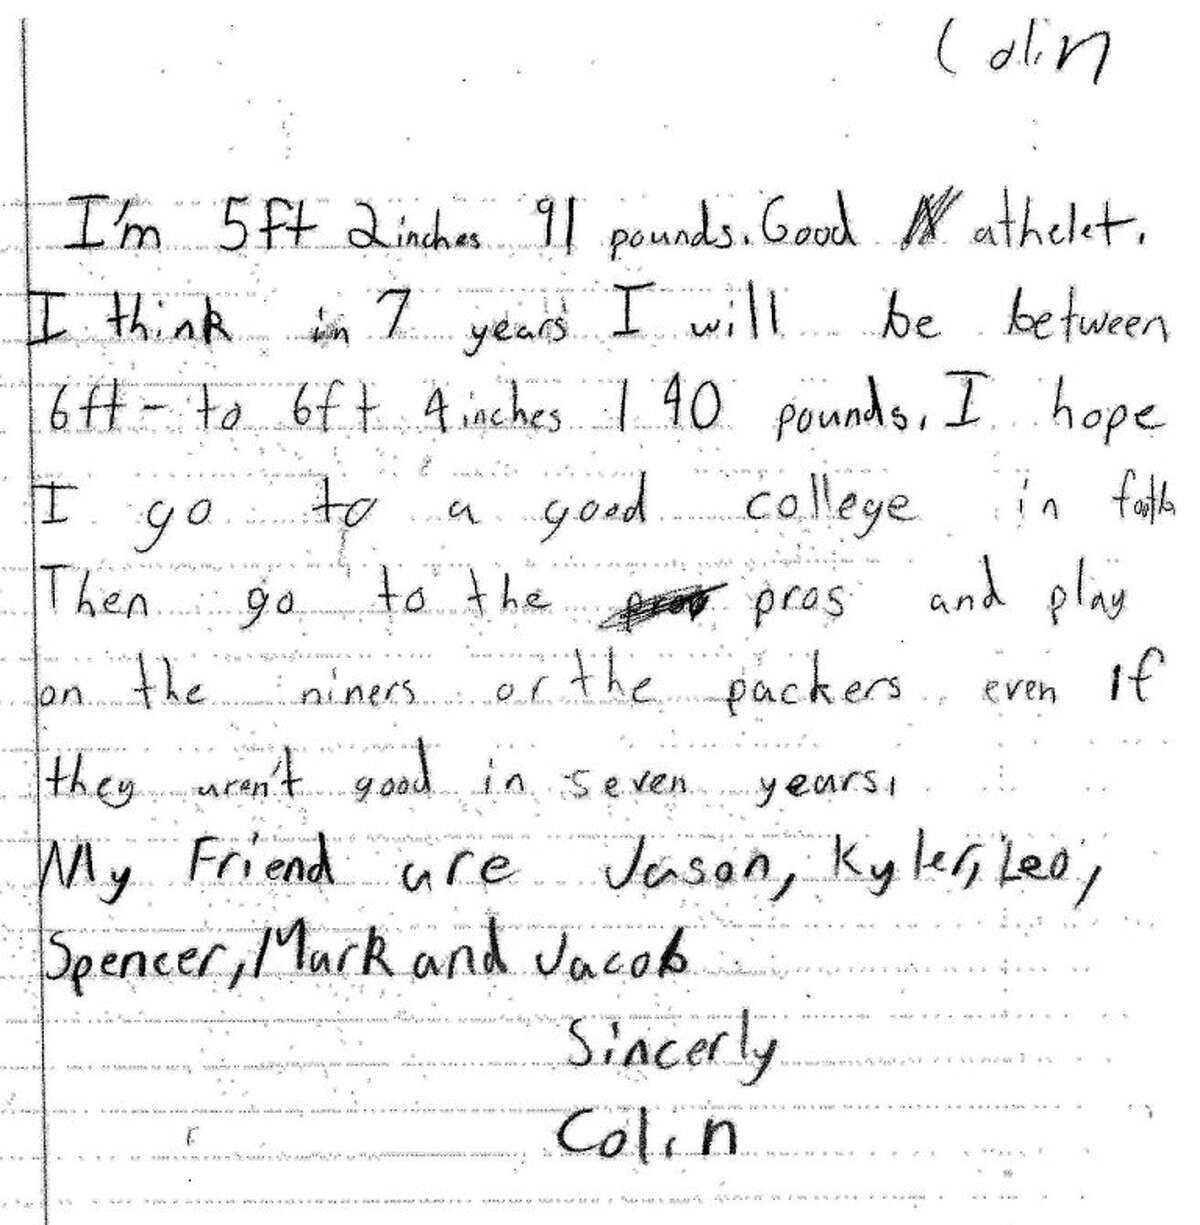 Colin Kaepernick's letter that he wrote in the fourth grade.